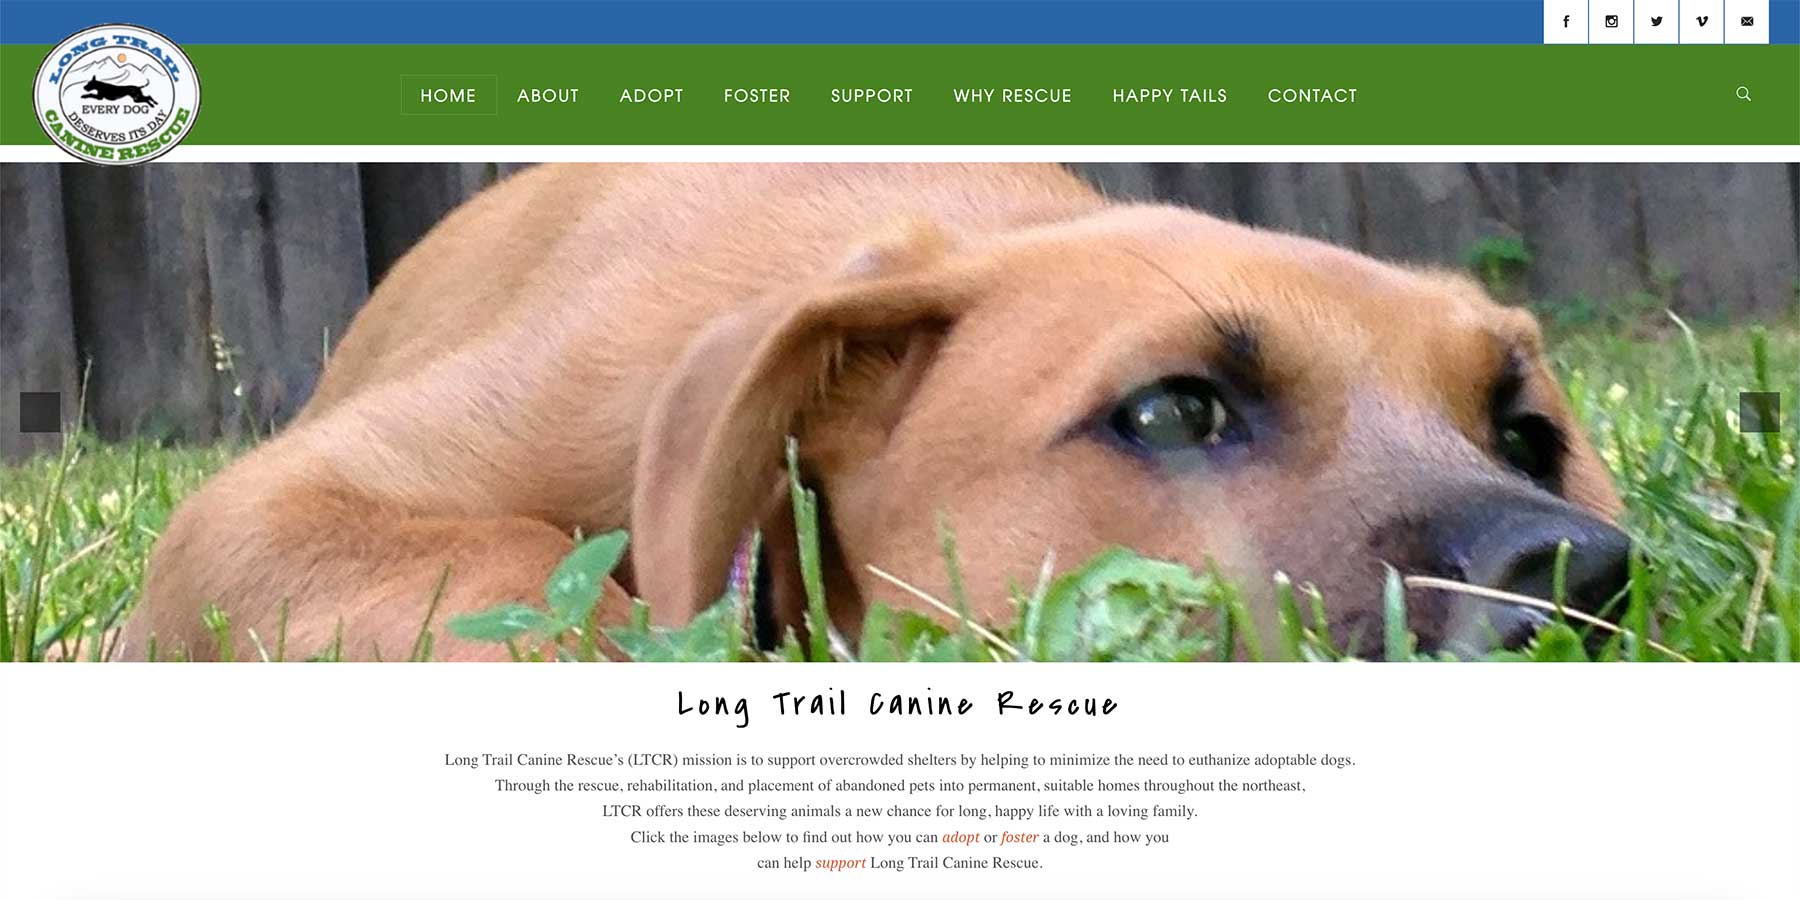 screenshot of Long Trail Canine Rescue's home page with a close up photo of a dog lying in the grass